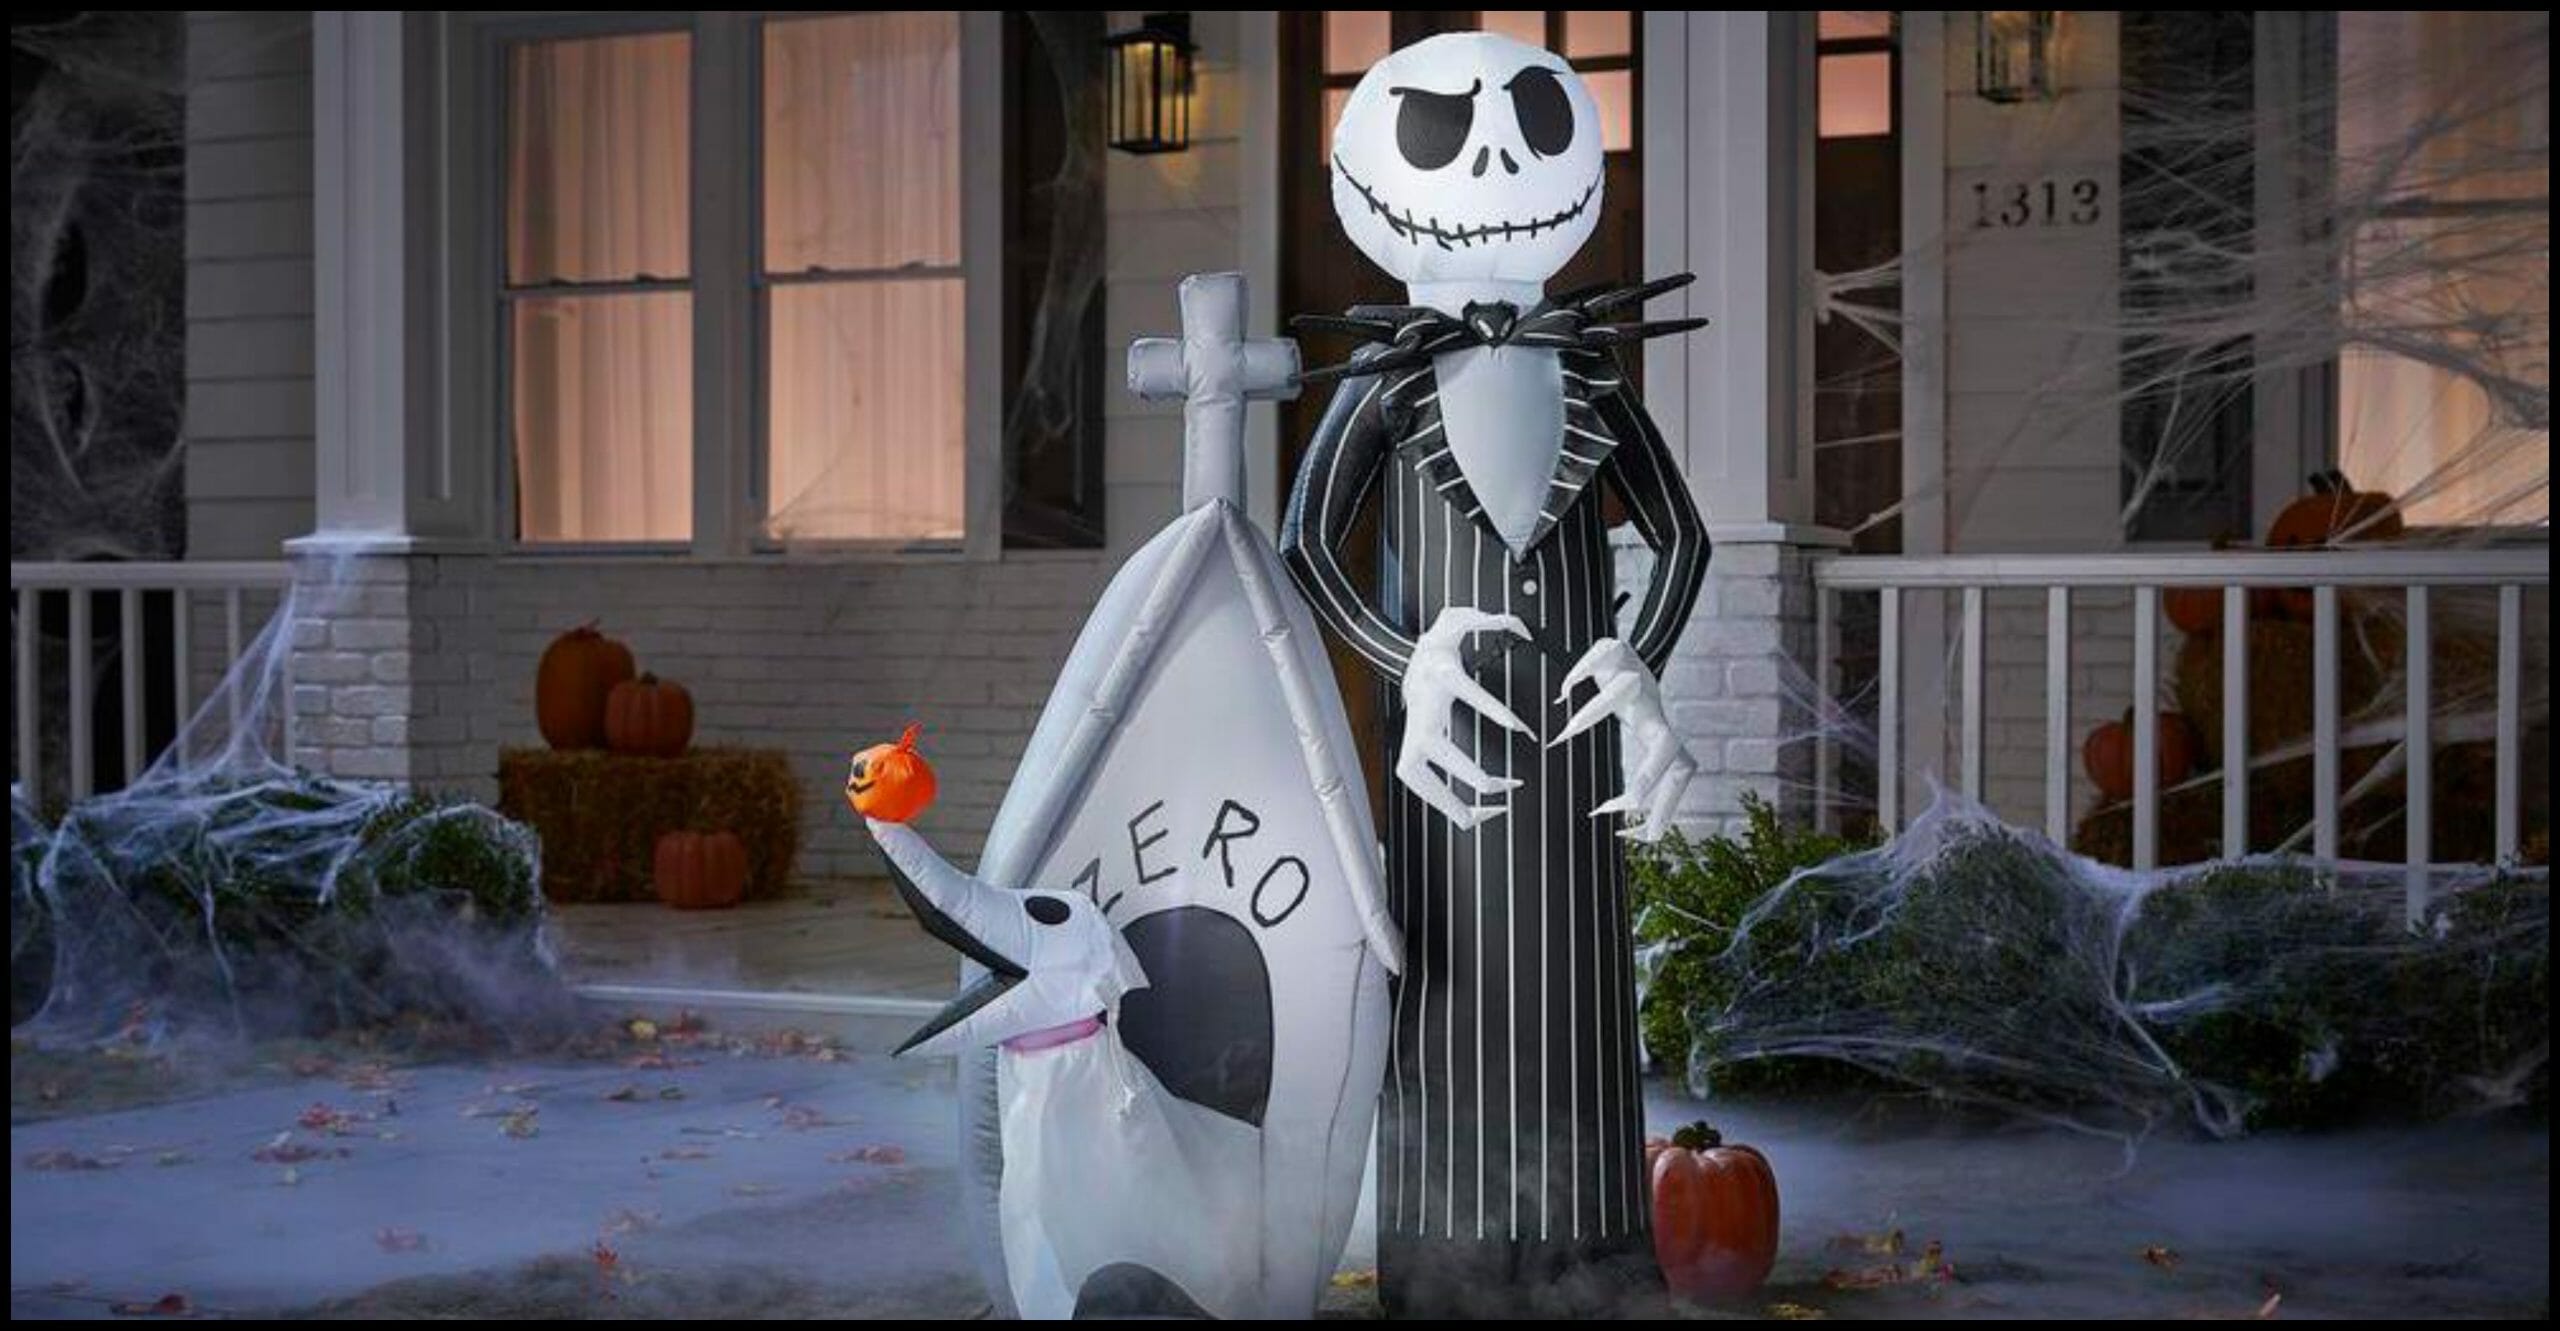 Home Depot Released a Jack Skellington and Zero Inflatable Just in Time for Halloween